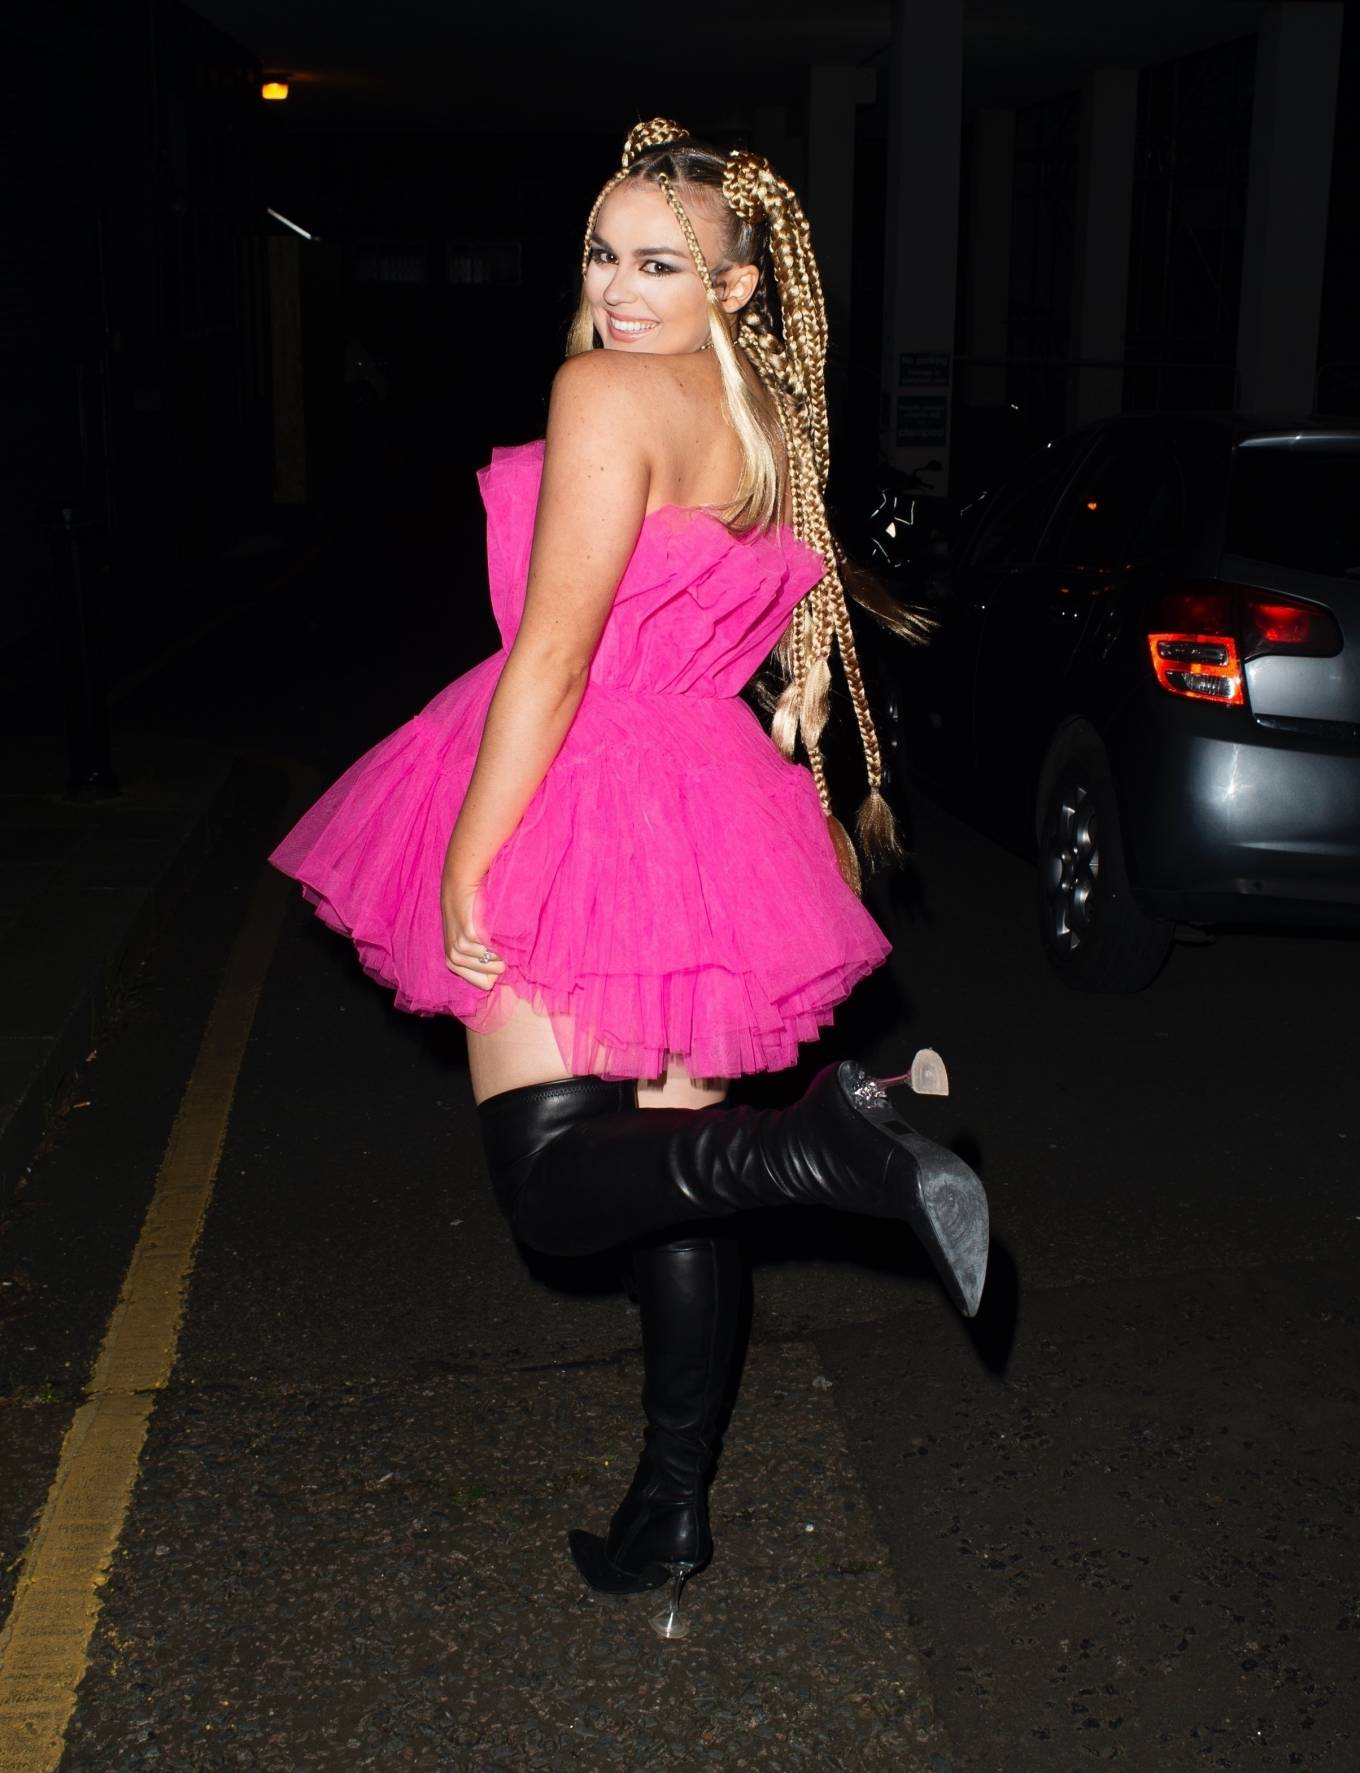 Tallia Storm – Night out in pink dress and thigh-high boots in London ...